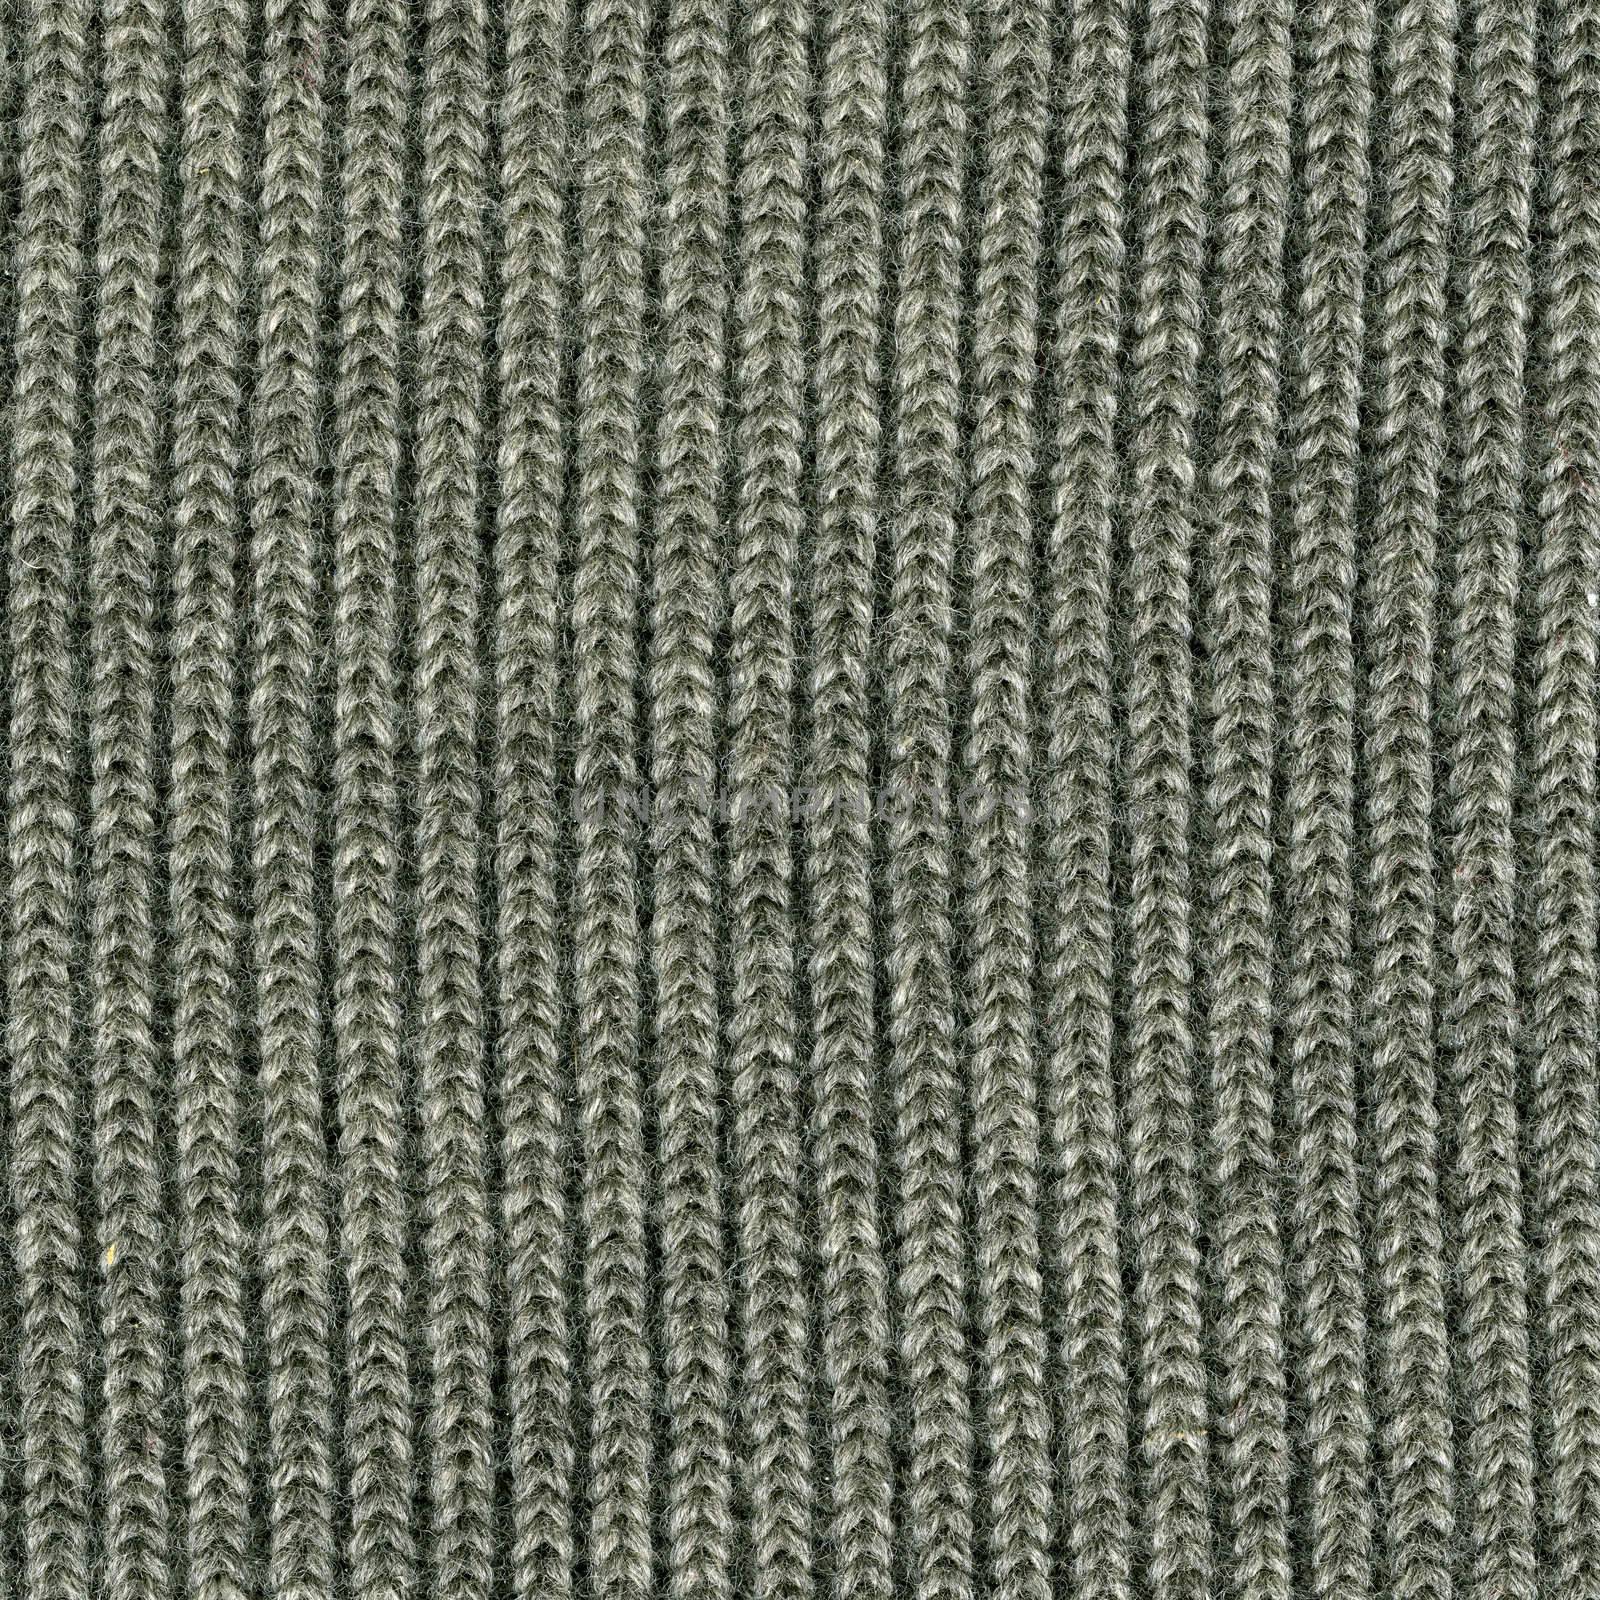 close-up of gray knitted wool sweater texture, vertical thread patterns